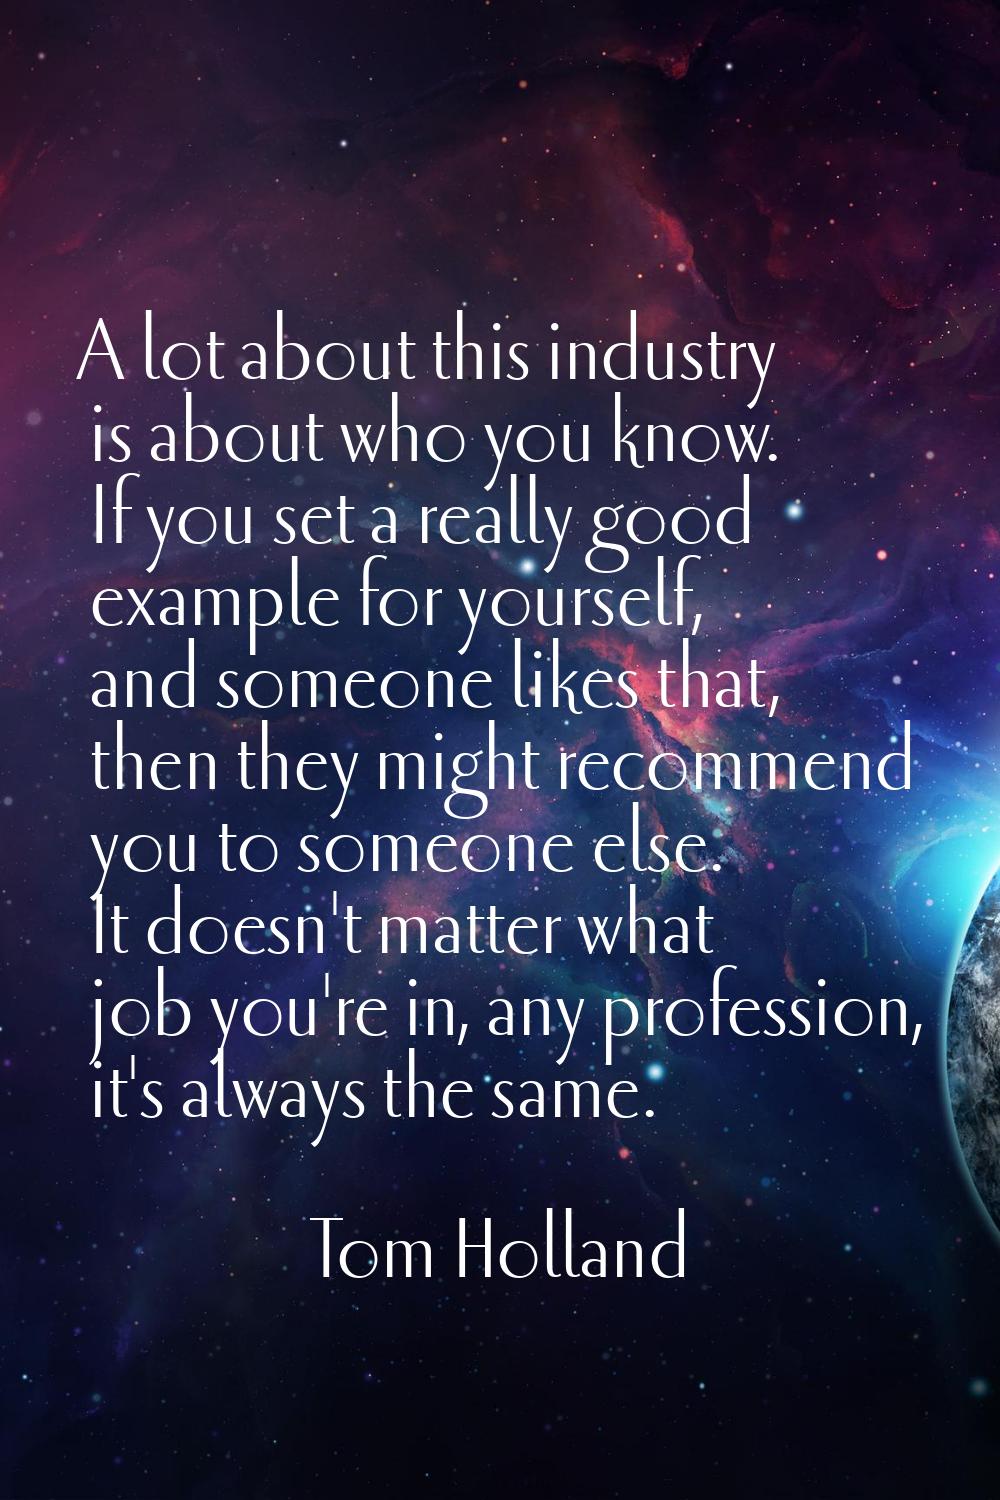 A lot about this industry is about who you know. If you set a really good example for yourself, and